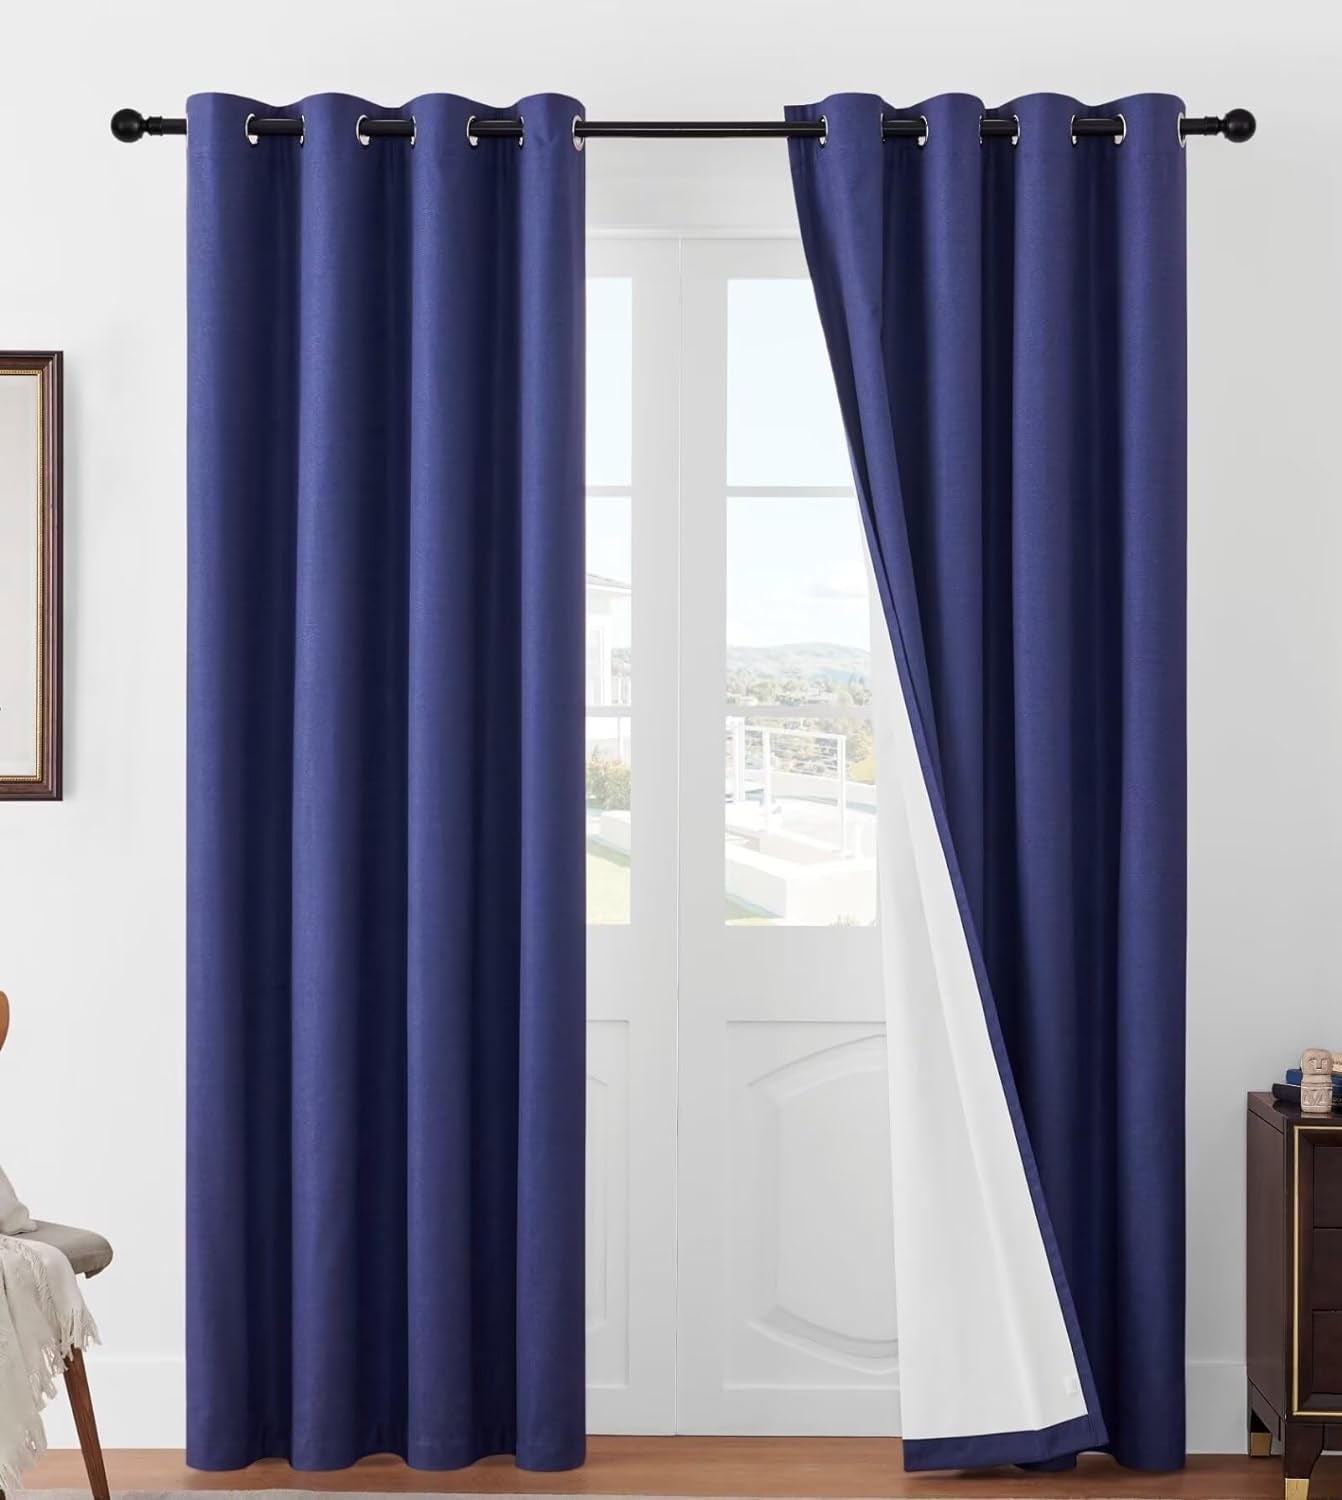 Joydeco 100% Blackout Curtains for Bedroom, Black Out Curtains 90 Inch Long, Ivory White Curtains for Living Room Window Thermal Insulated Drapes(W52 X L90 Inch, Ivory)  Joydeco 100 Blackout | Navy Blue 52W X 72L Inch X 2 Panels 